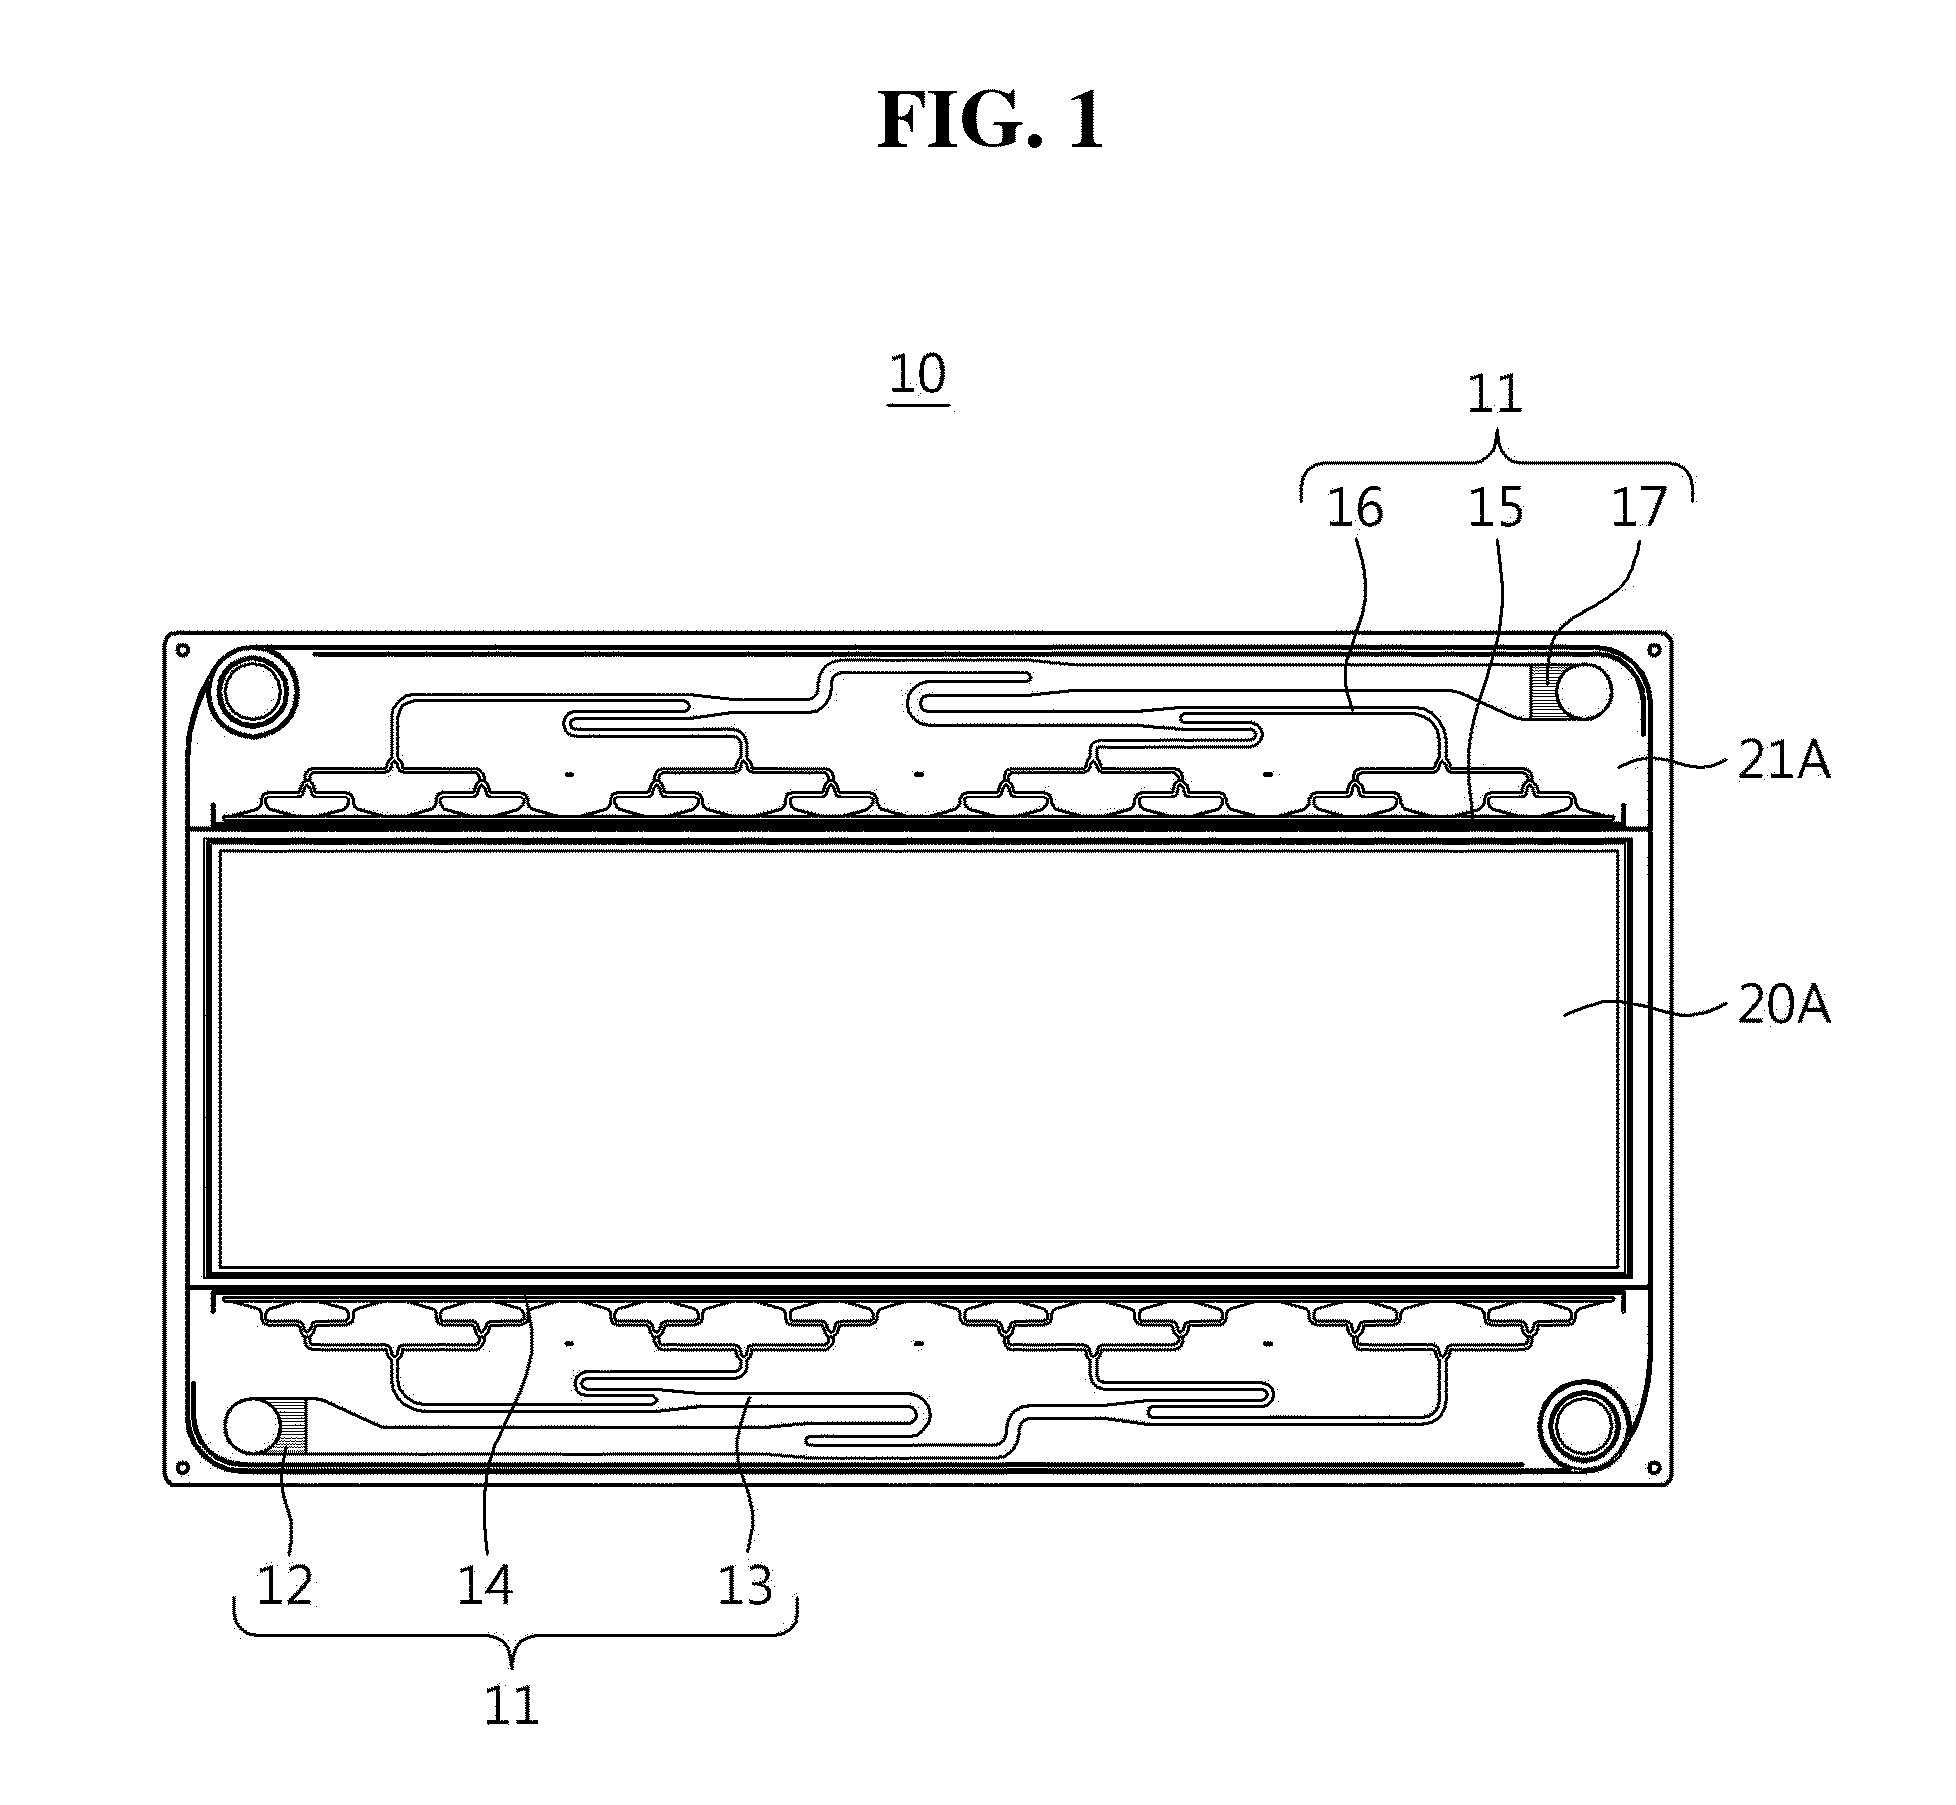 Redox flow battery and cell frame